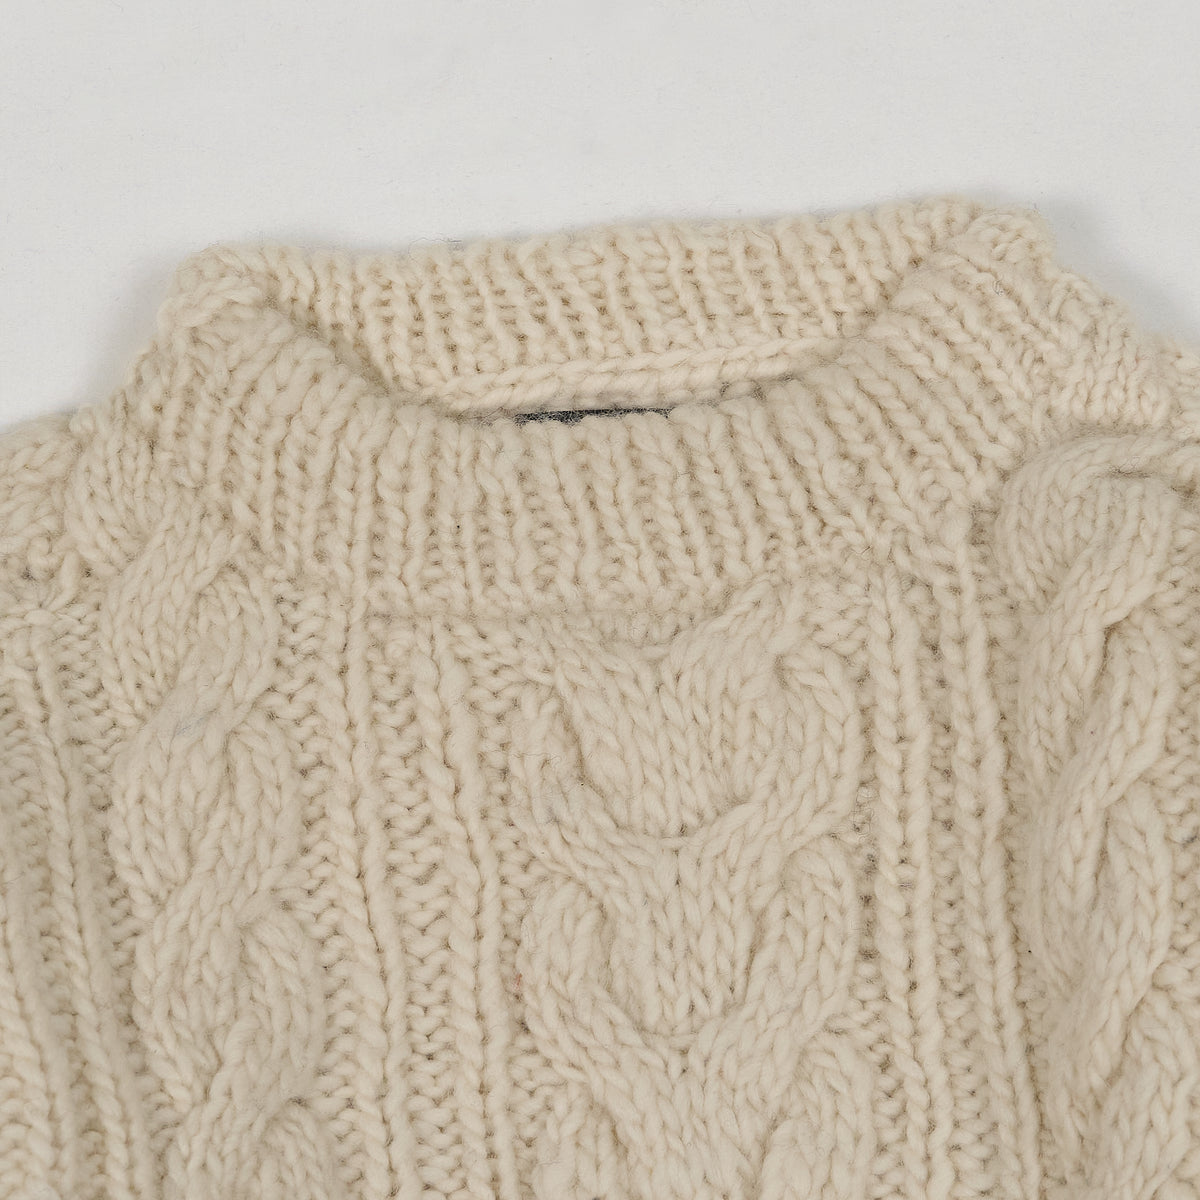 Chamula Cable Knit Fisherman Crew Neck Pullover